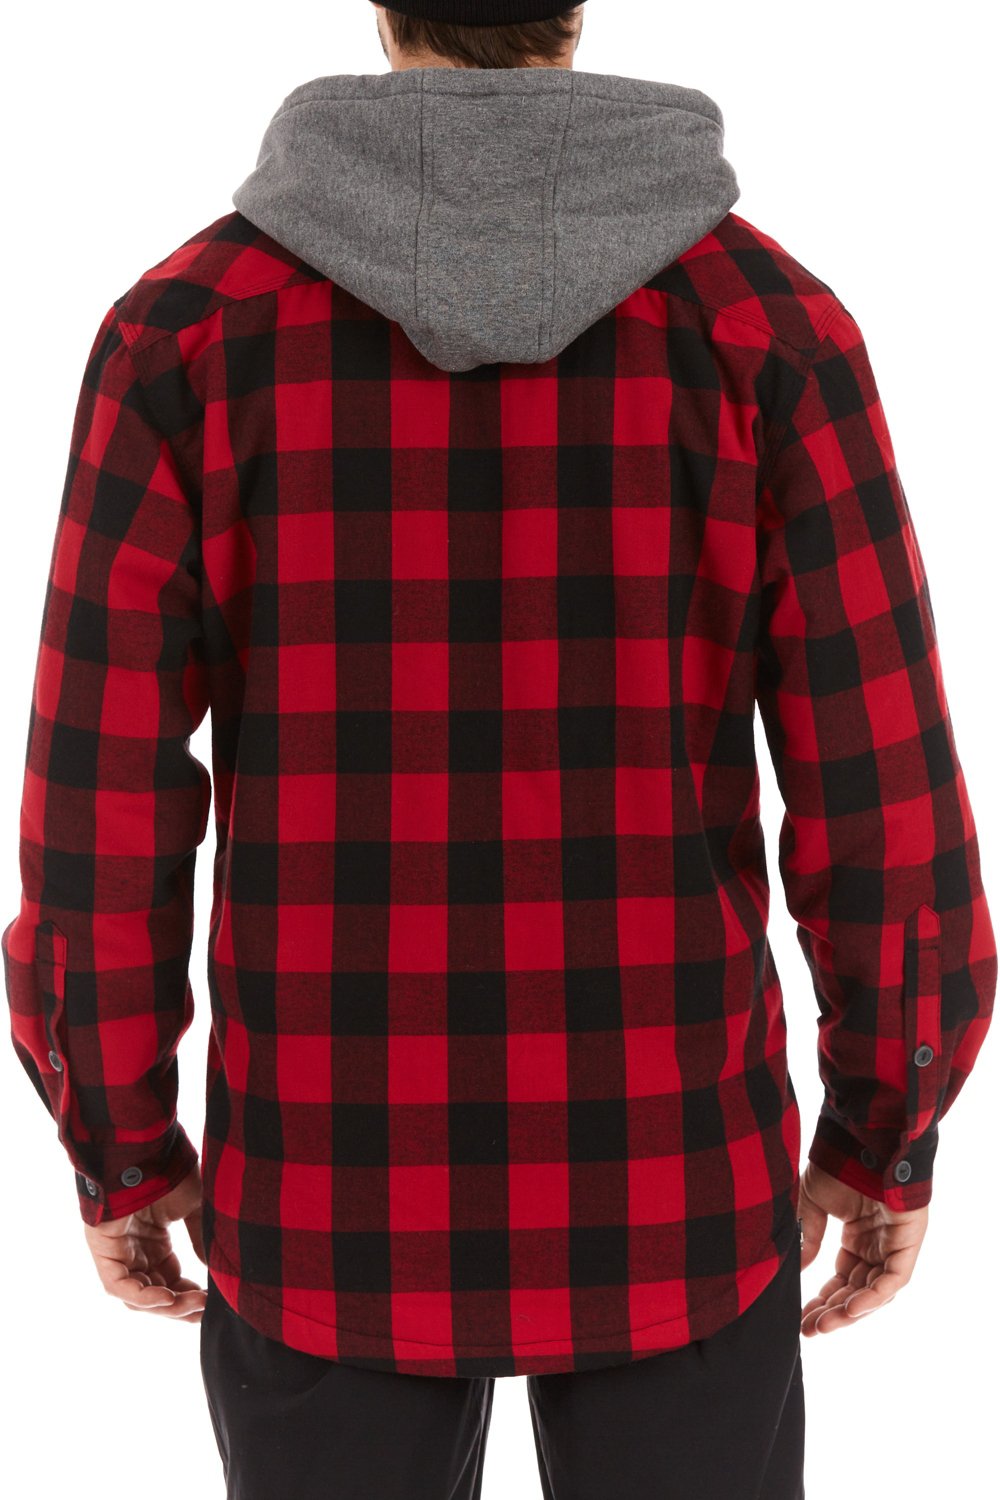 Smith's Workwear Men's Sherpa Lined Flannel Hooded Shirt Jacket | Academy